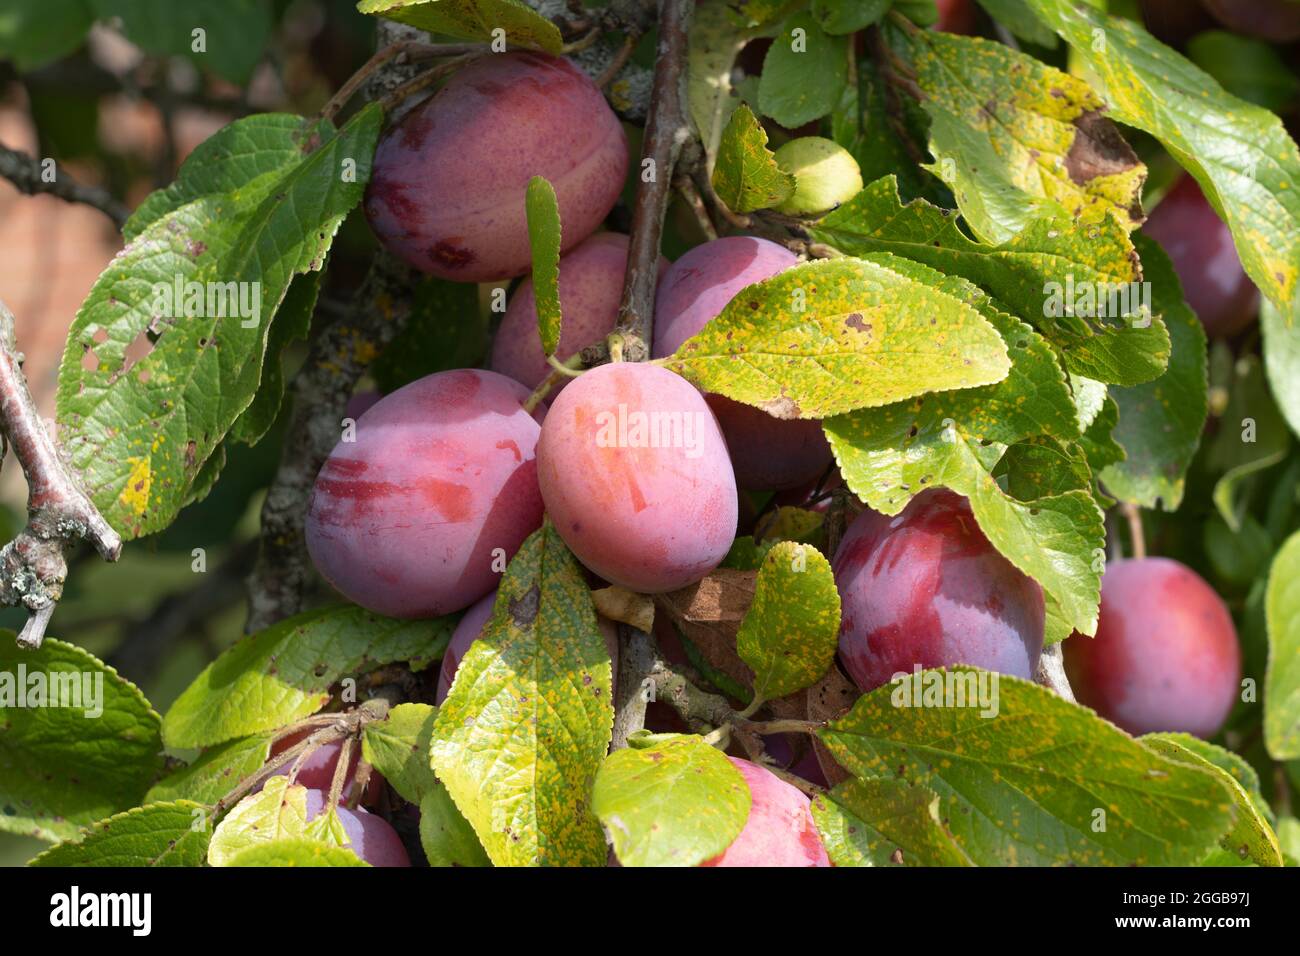 Avalon plums - Avalon is a relatively new variety of plum tree which was bred to be better than Victoria. Growing on a plum tree in August, England Stock Photo